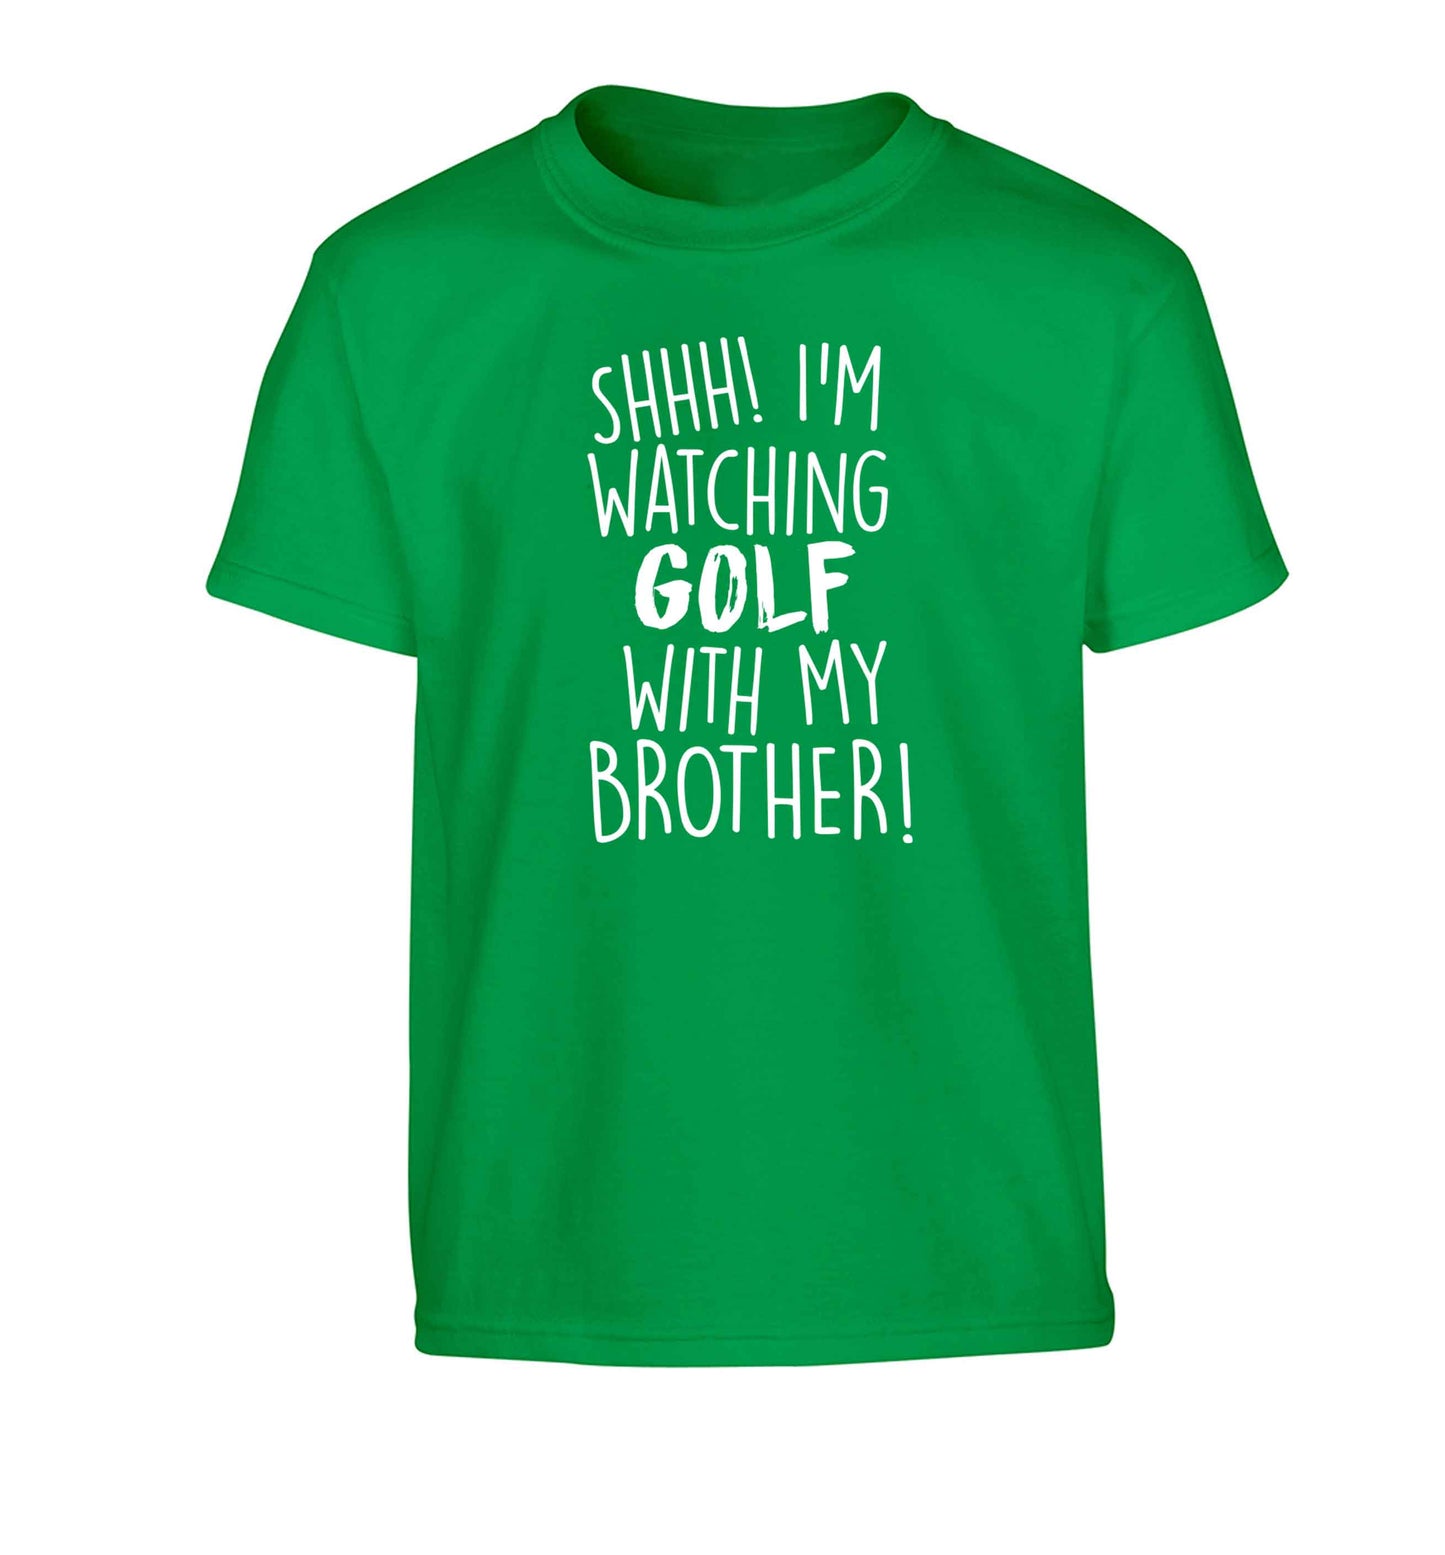 Shh I'm watching golf with my brother Children's green Tshirt 12-13 Years